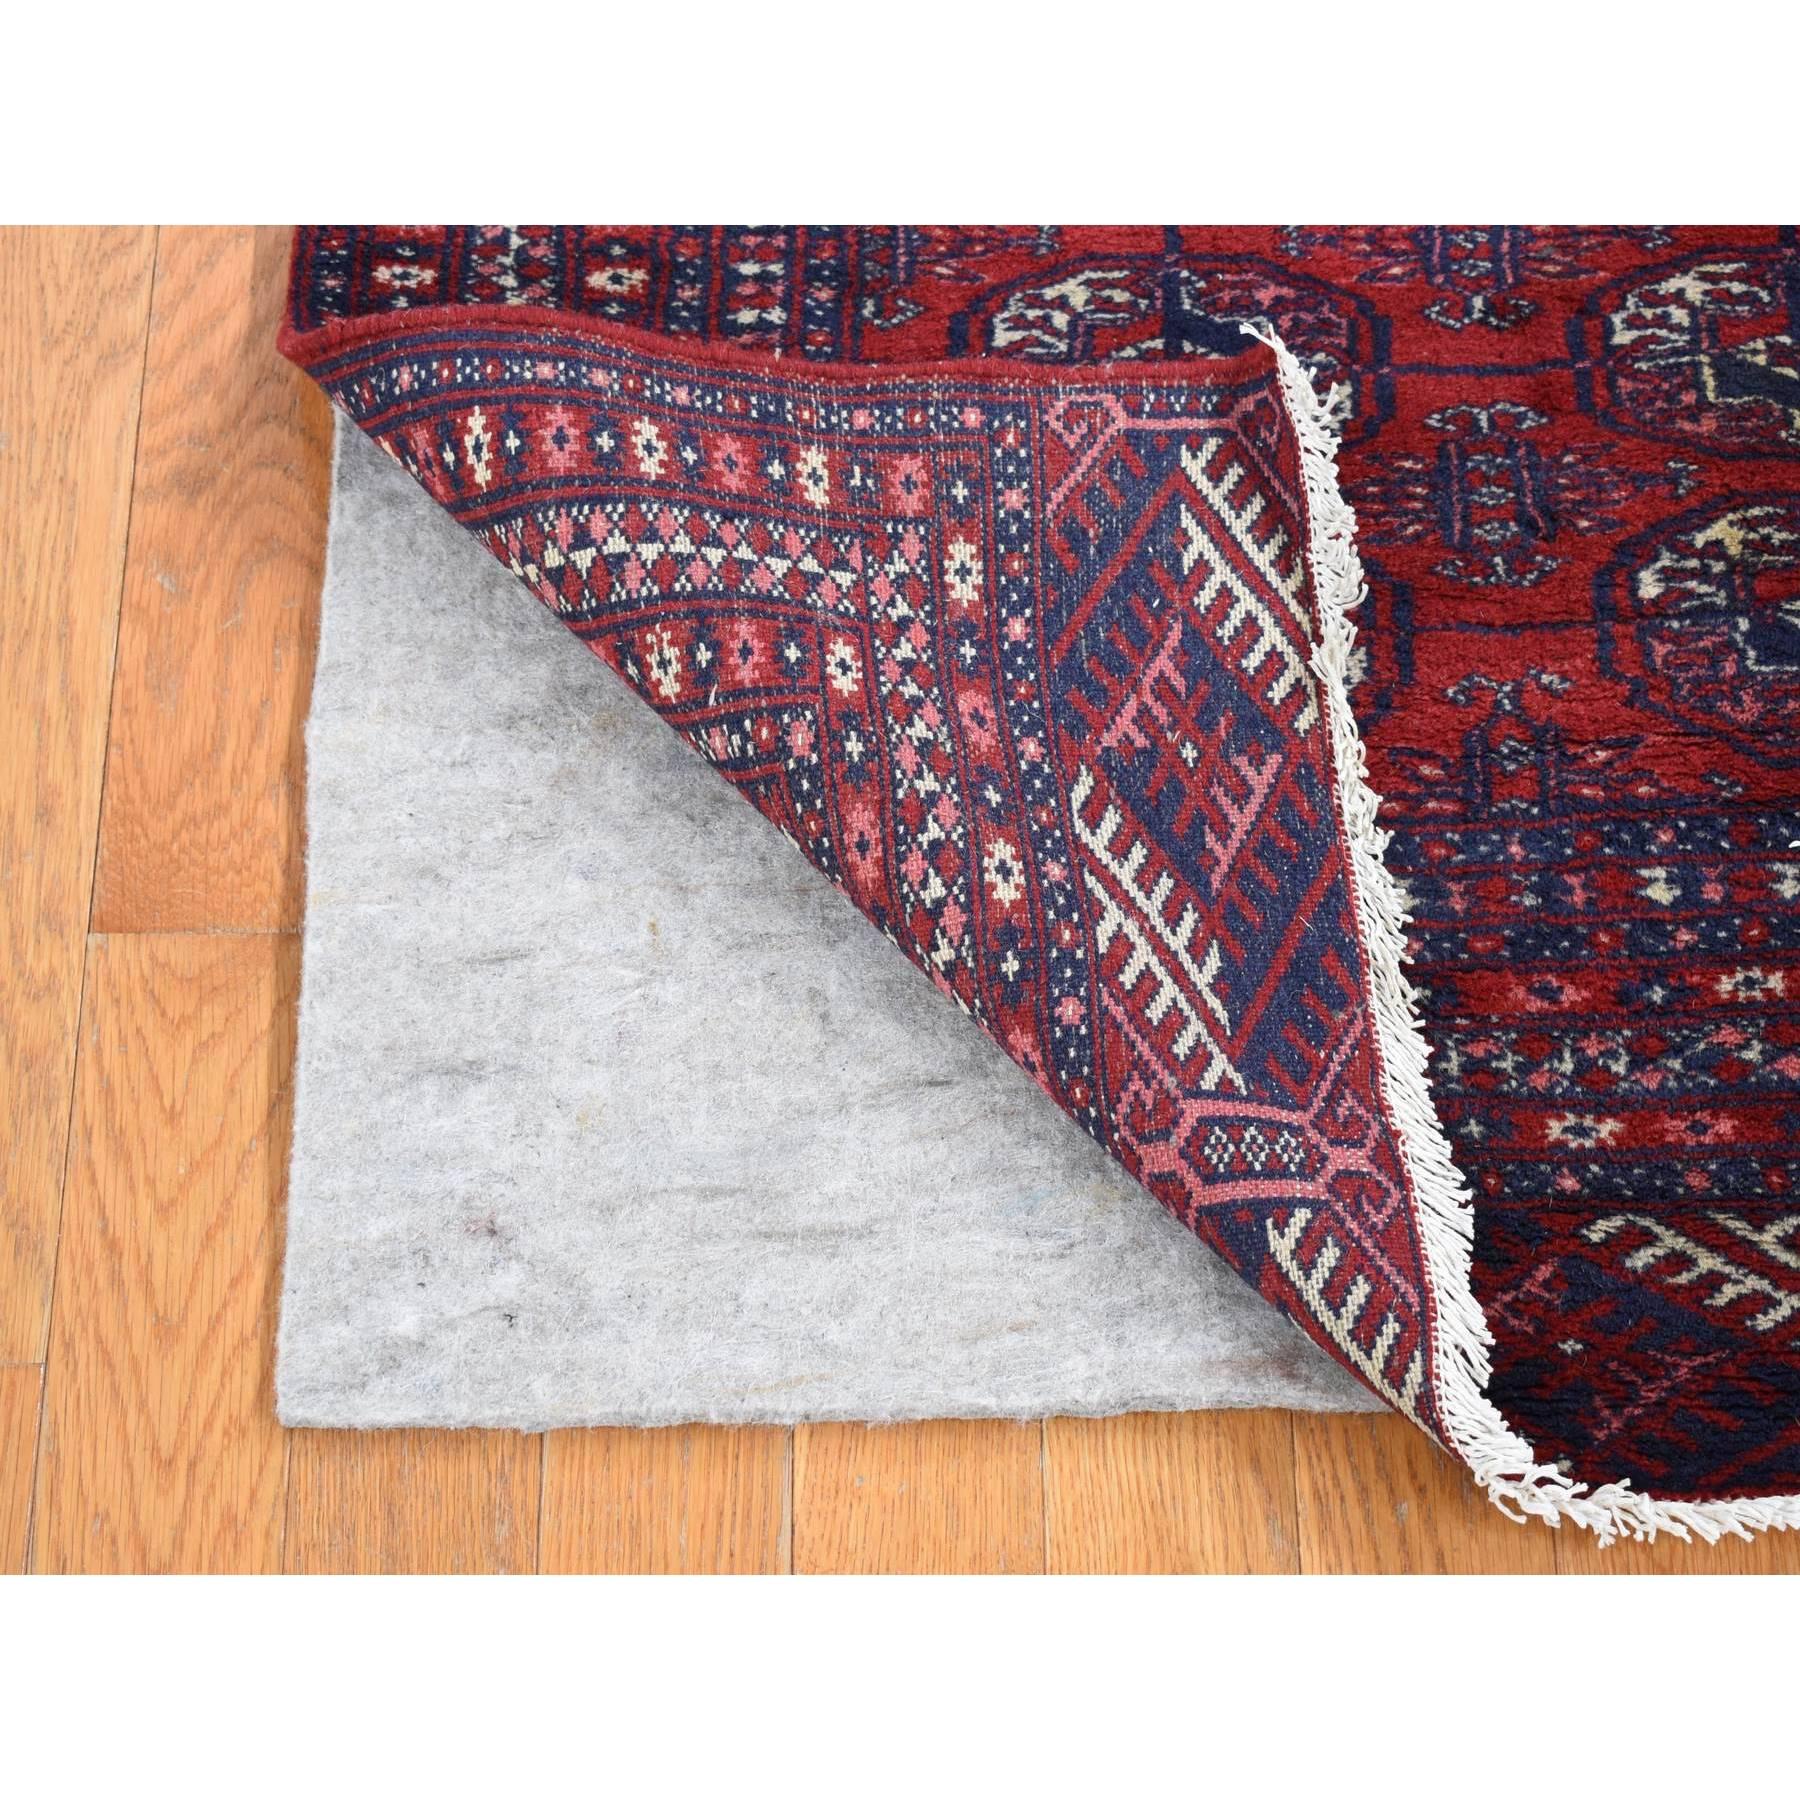 This fabulous hand-knotted carpet has been created and designed for extra strength and durability. This rug has been handcrafted for weeks in the traditional method that is used to make exact rug size in feet and inches : 3'1